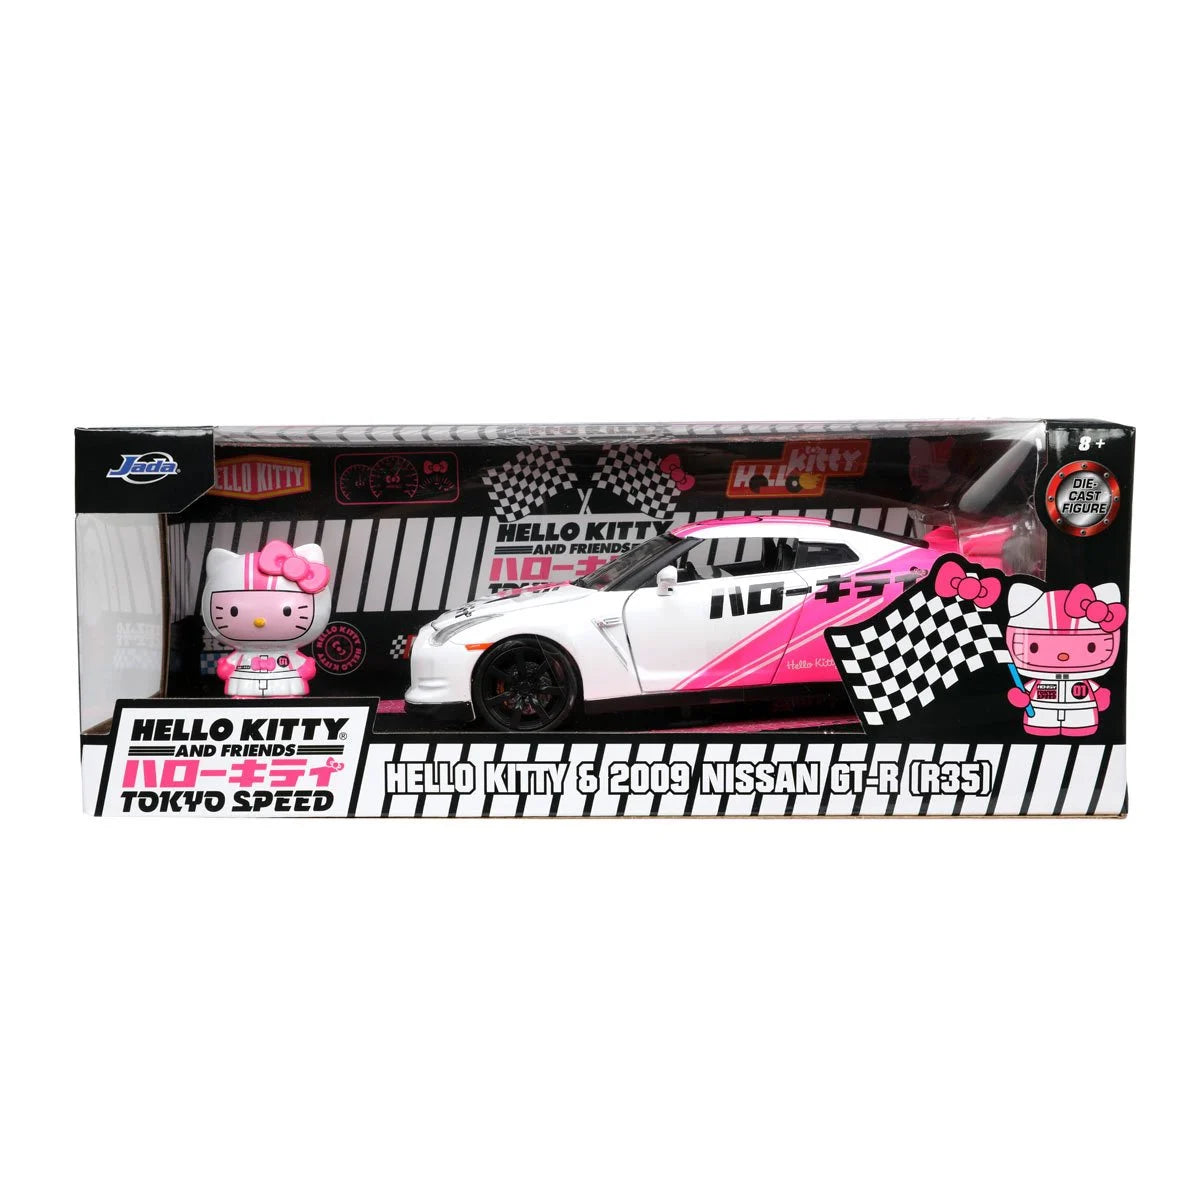 HELLO KITTY TOKYO SPEED 2009 NISSAN GT-R R35 1:24 SCALE DIE-CAST METAL VEHICLE WITH FIGURE